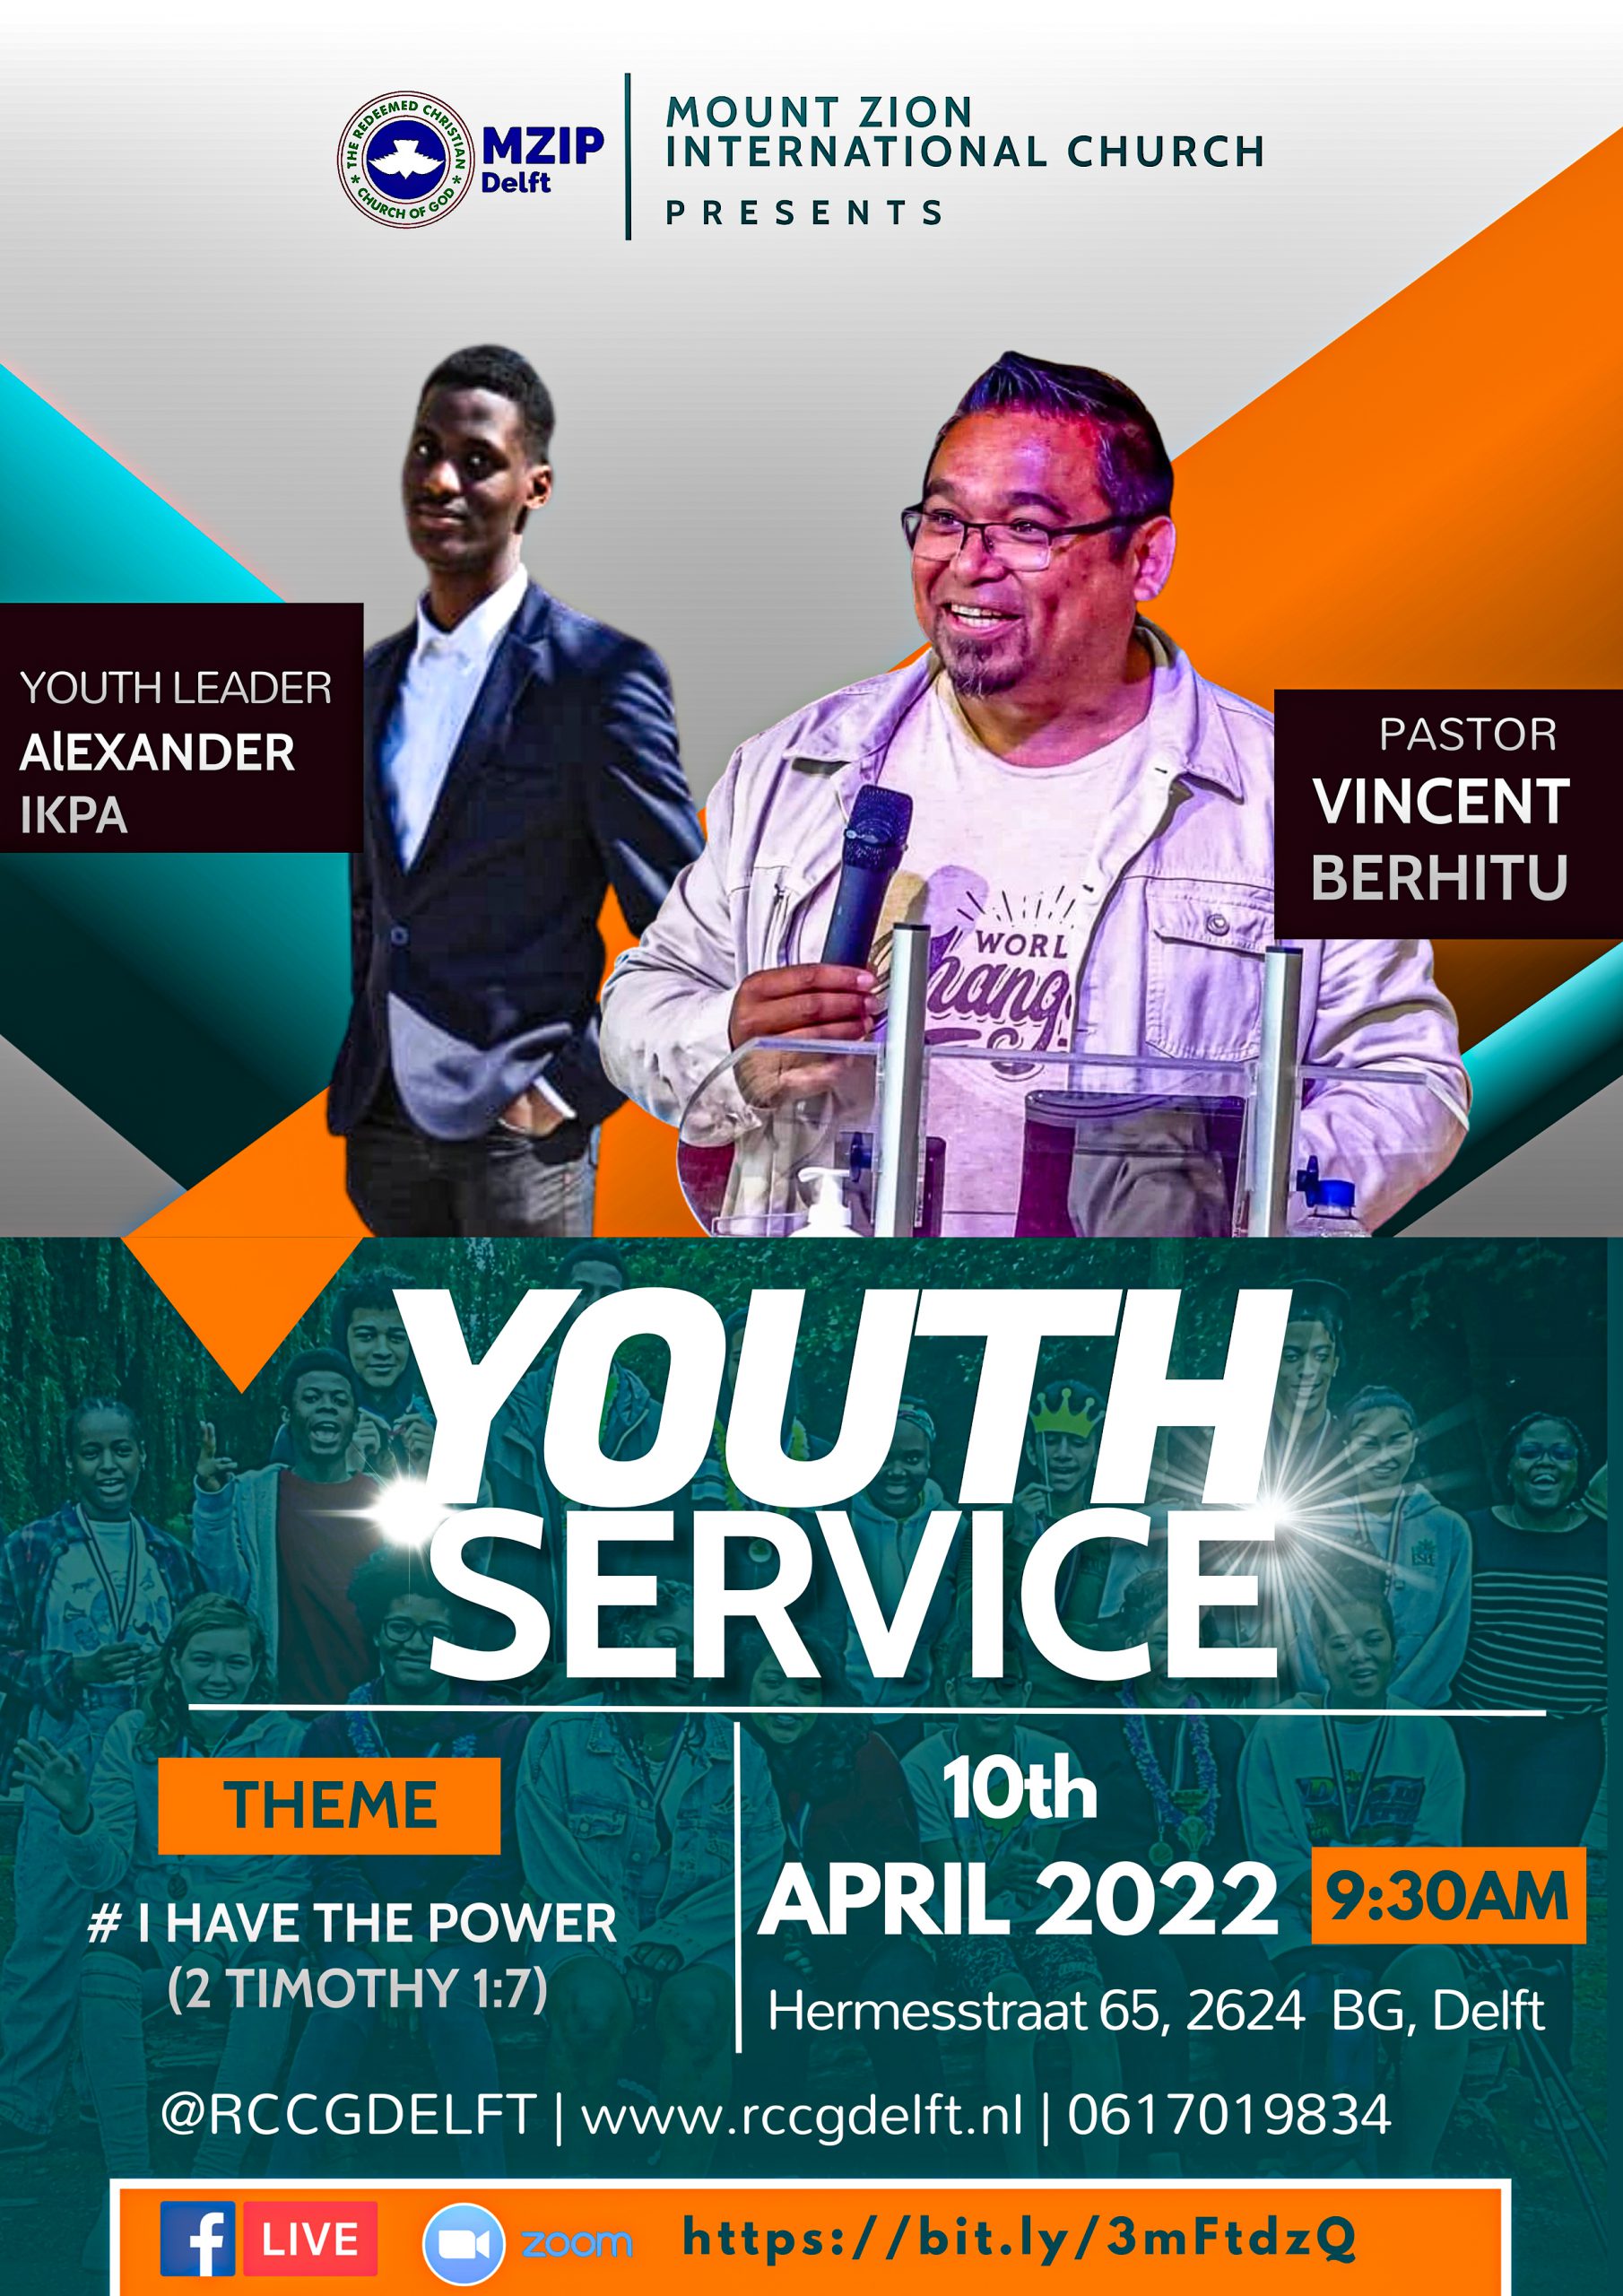 Copy of Youth service_1